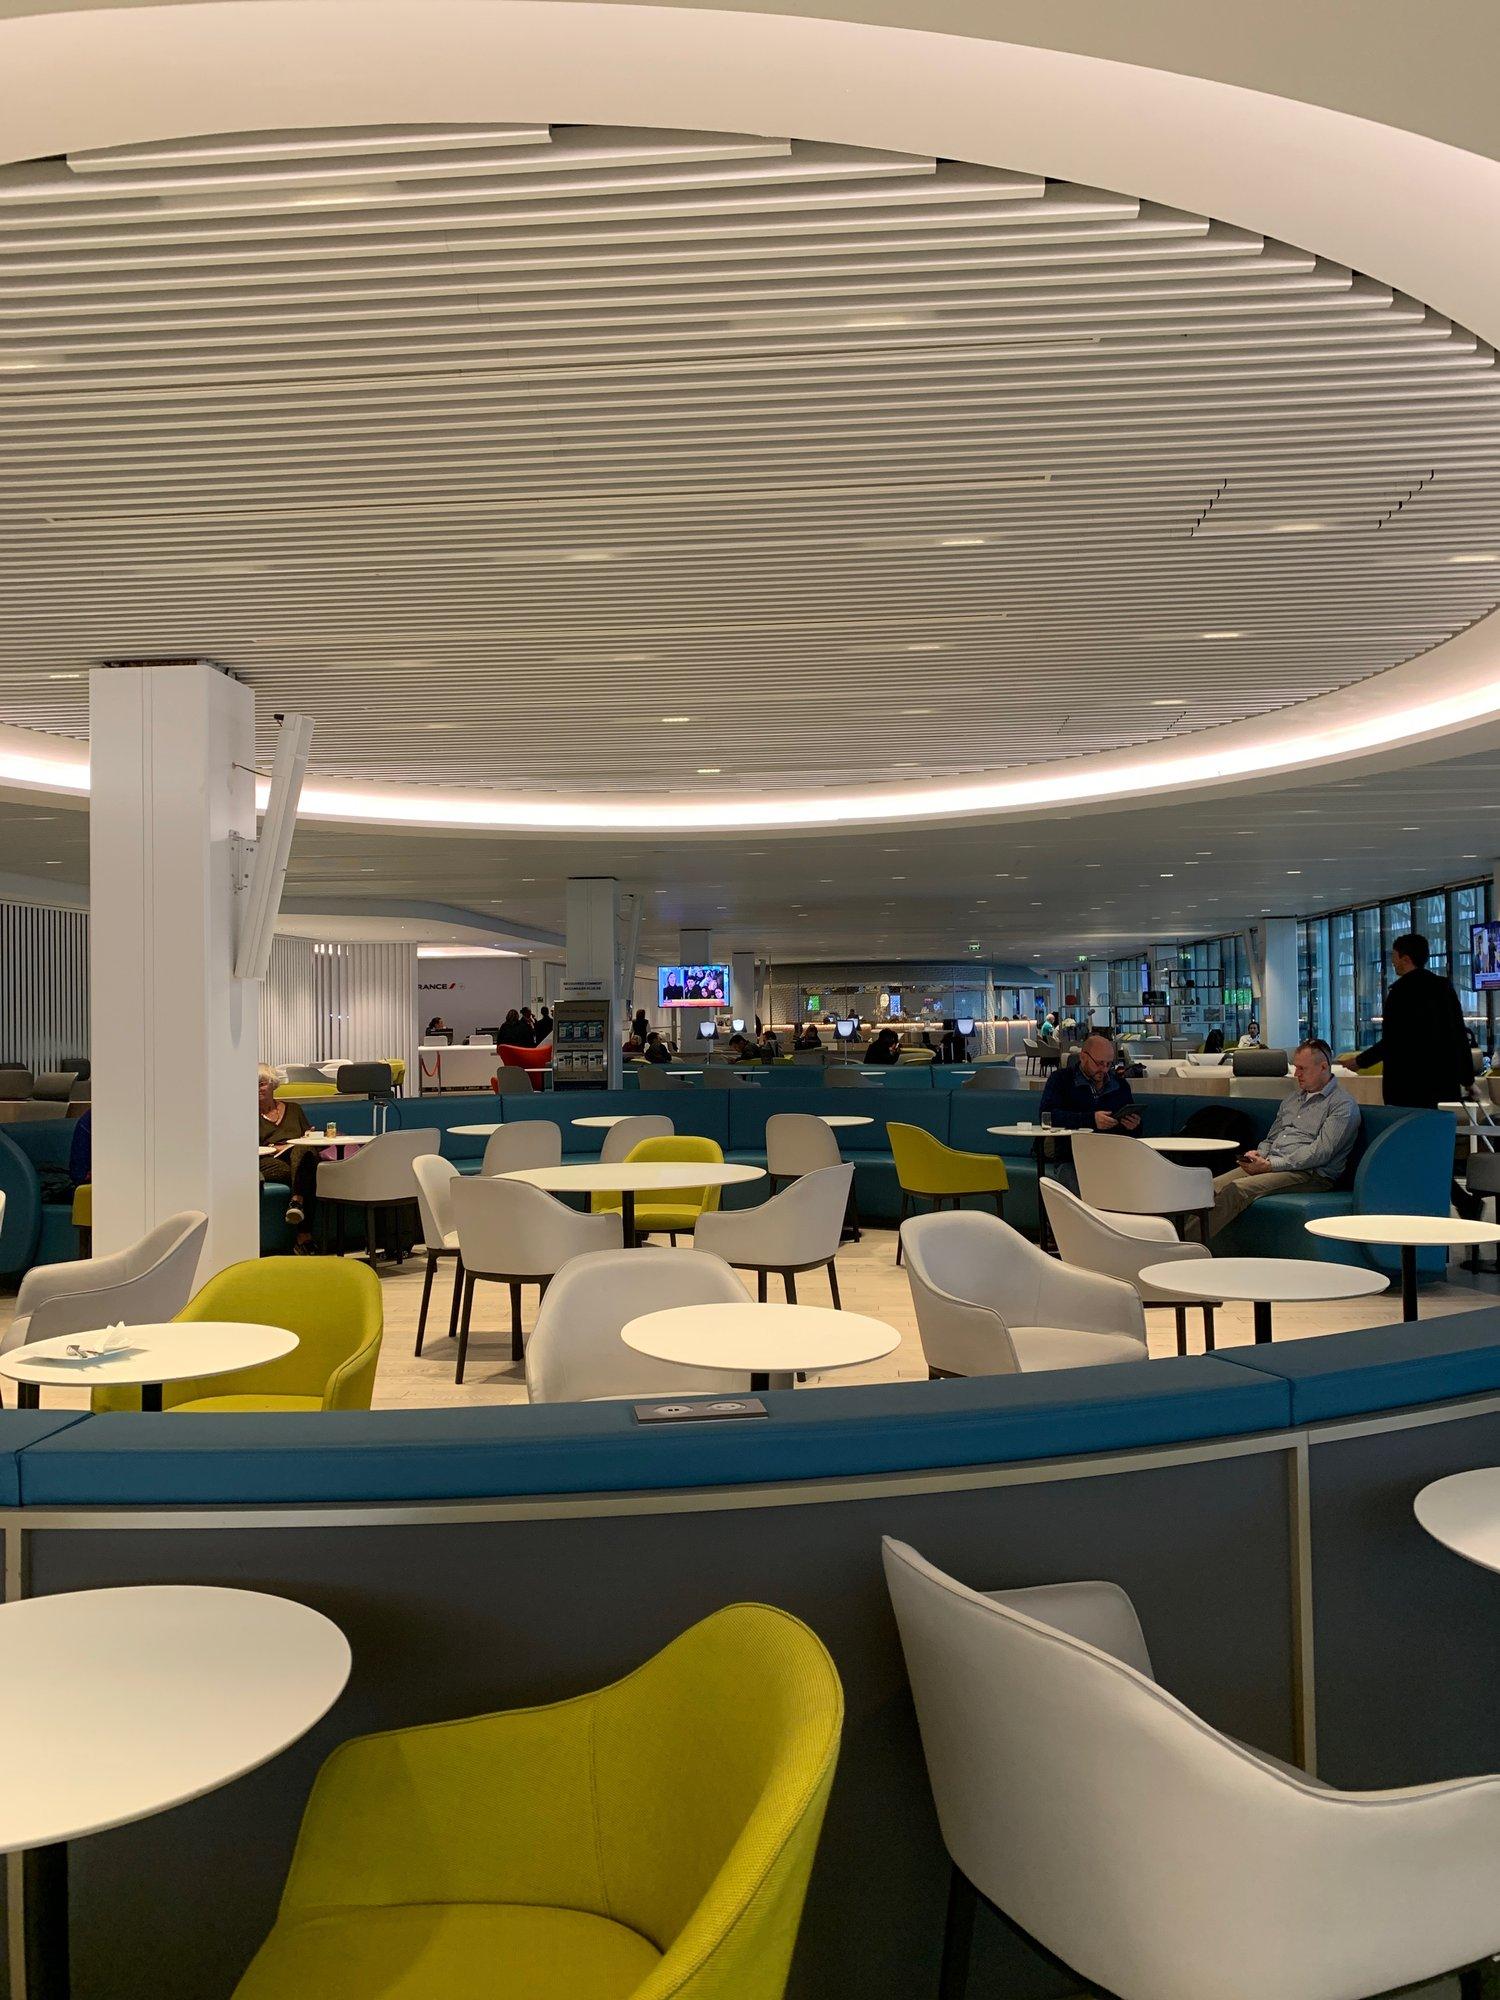 Air France Lounge (Concourse M) image 17 of 17